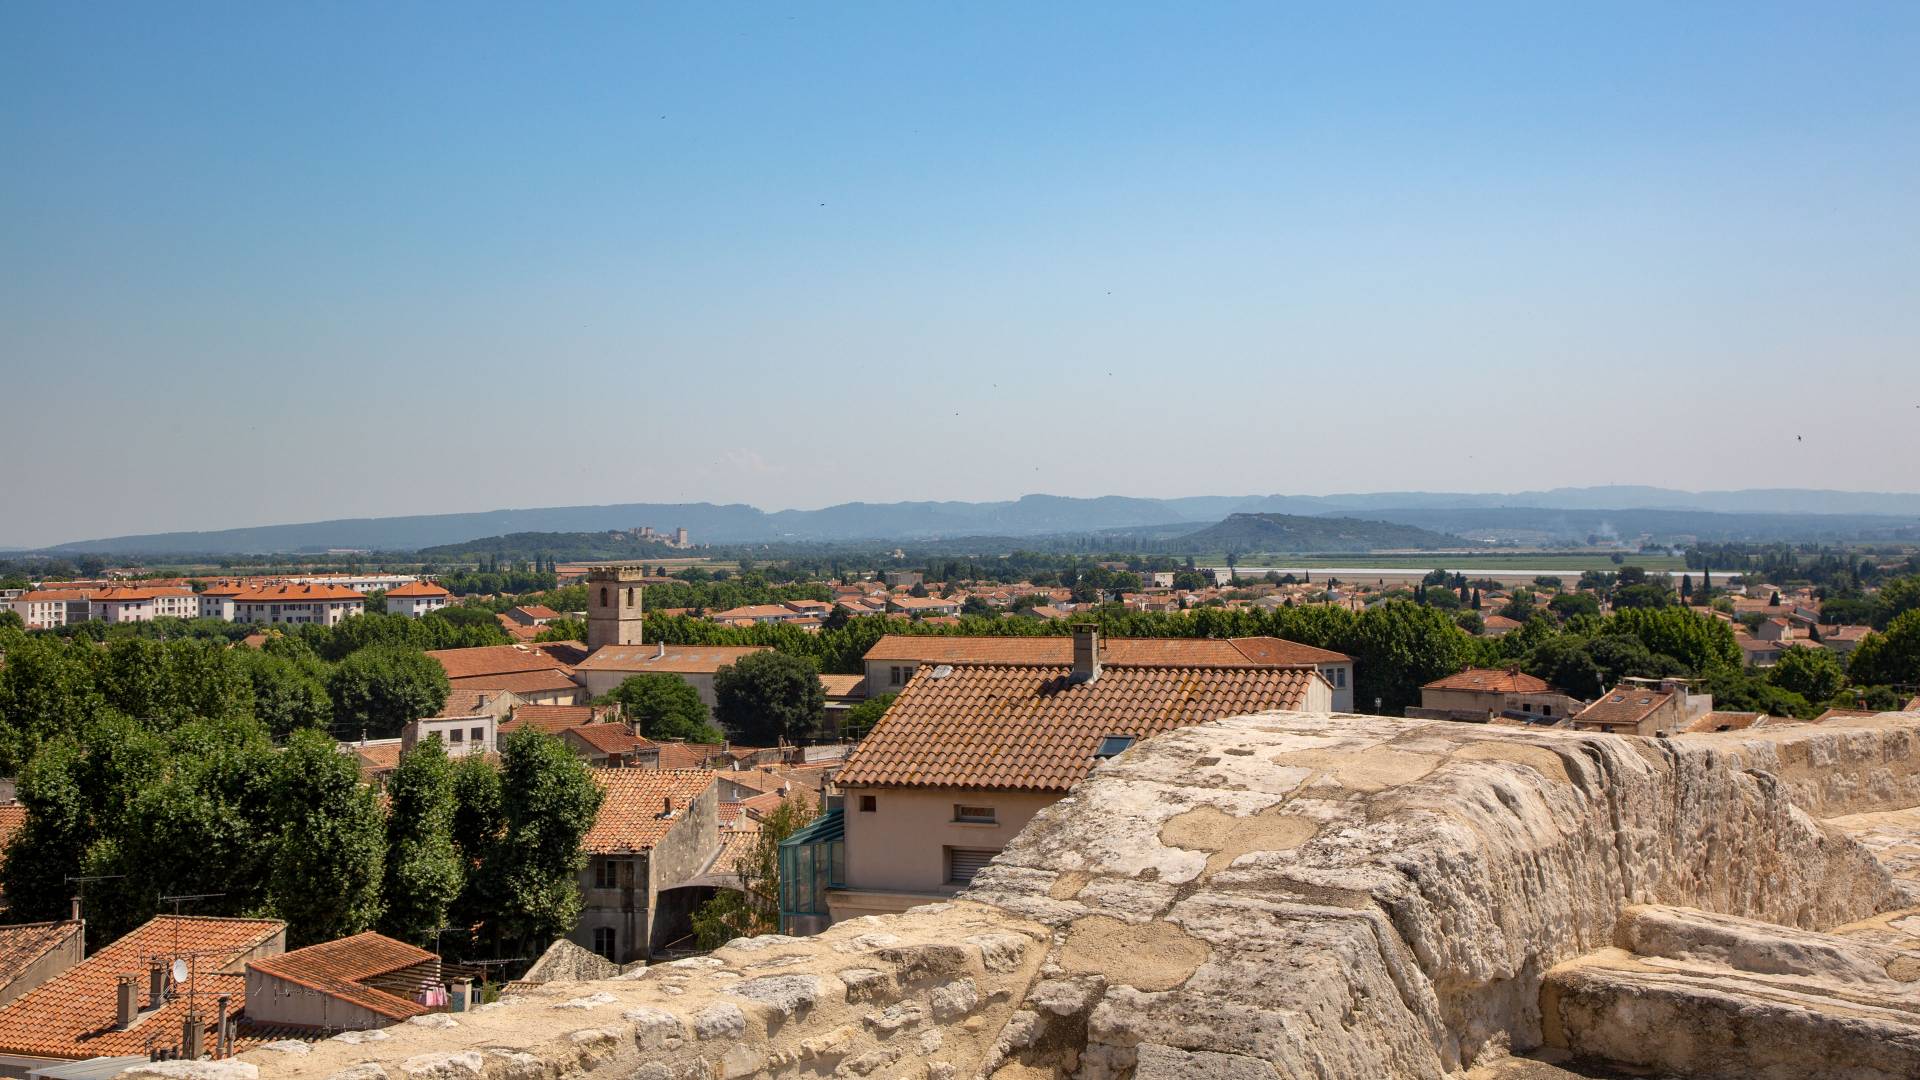 View of Arles, France from amphitheater